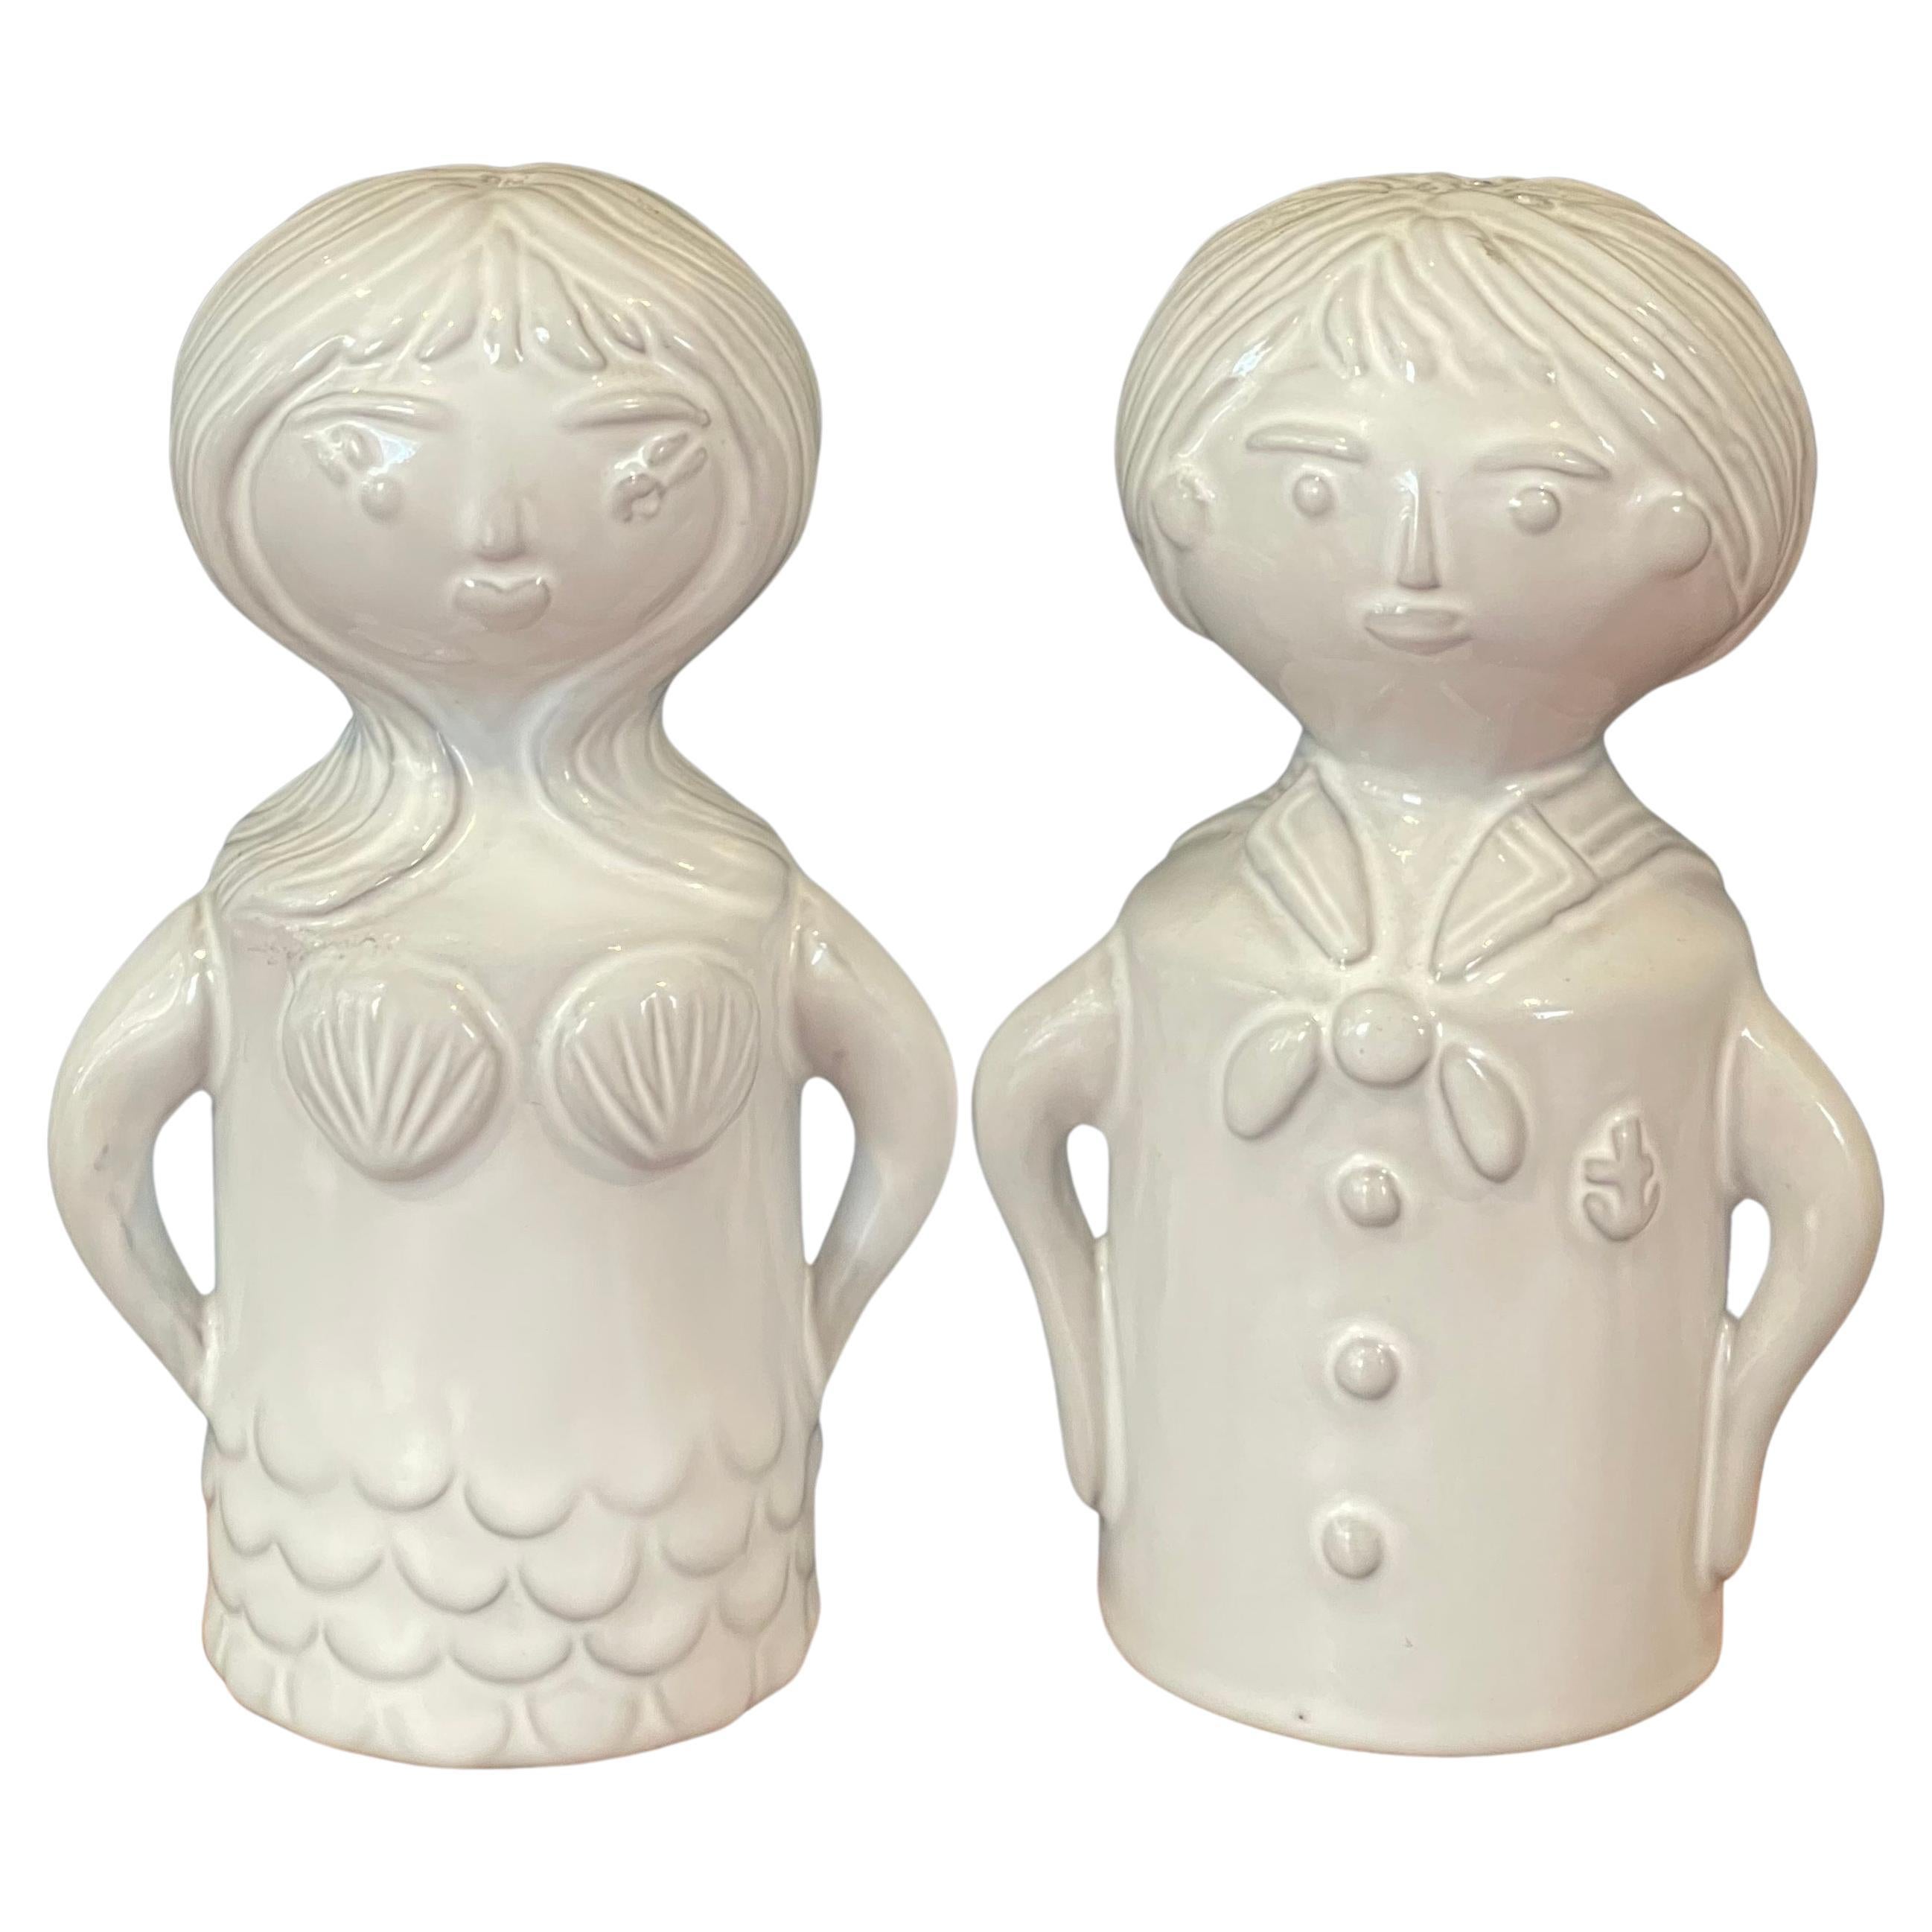 Sailor and Siren Ceramic Salt and Pepper Shakers by Jonathan Adler For Sale